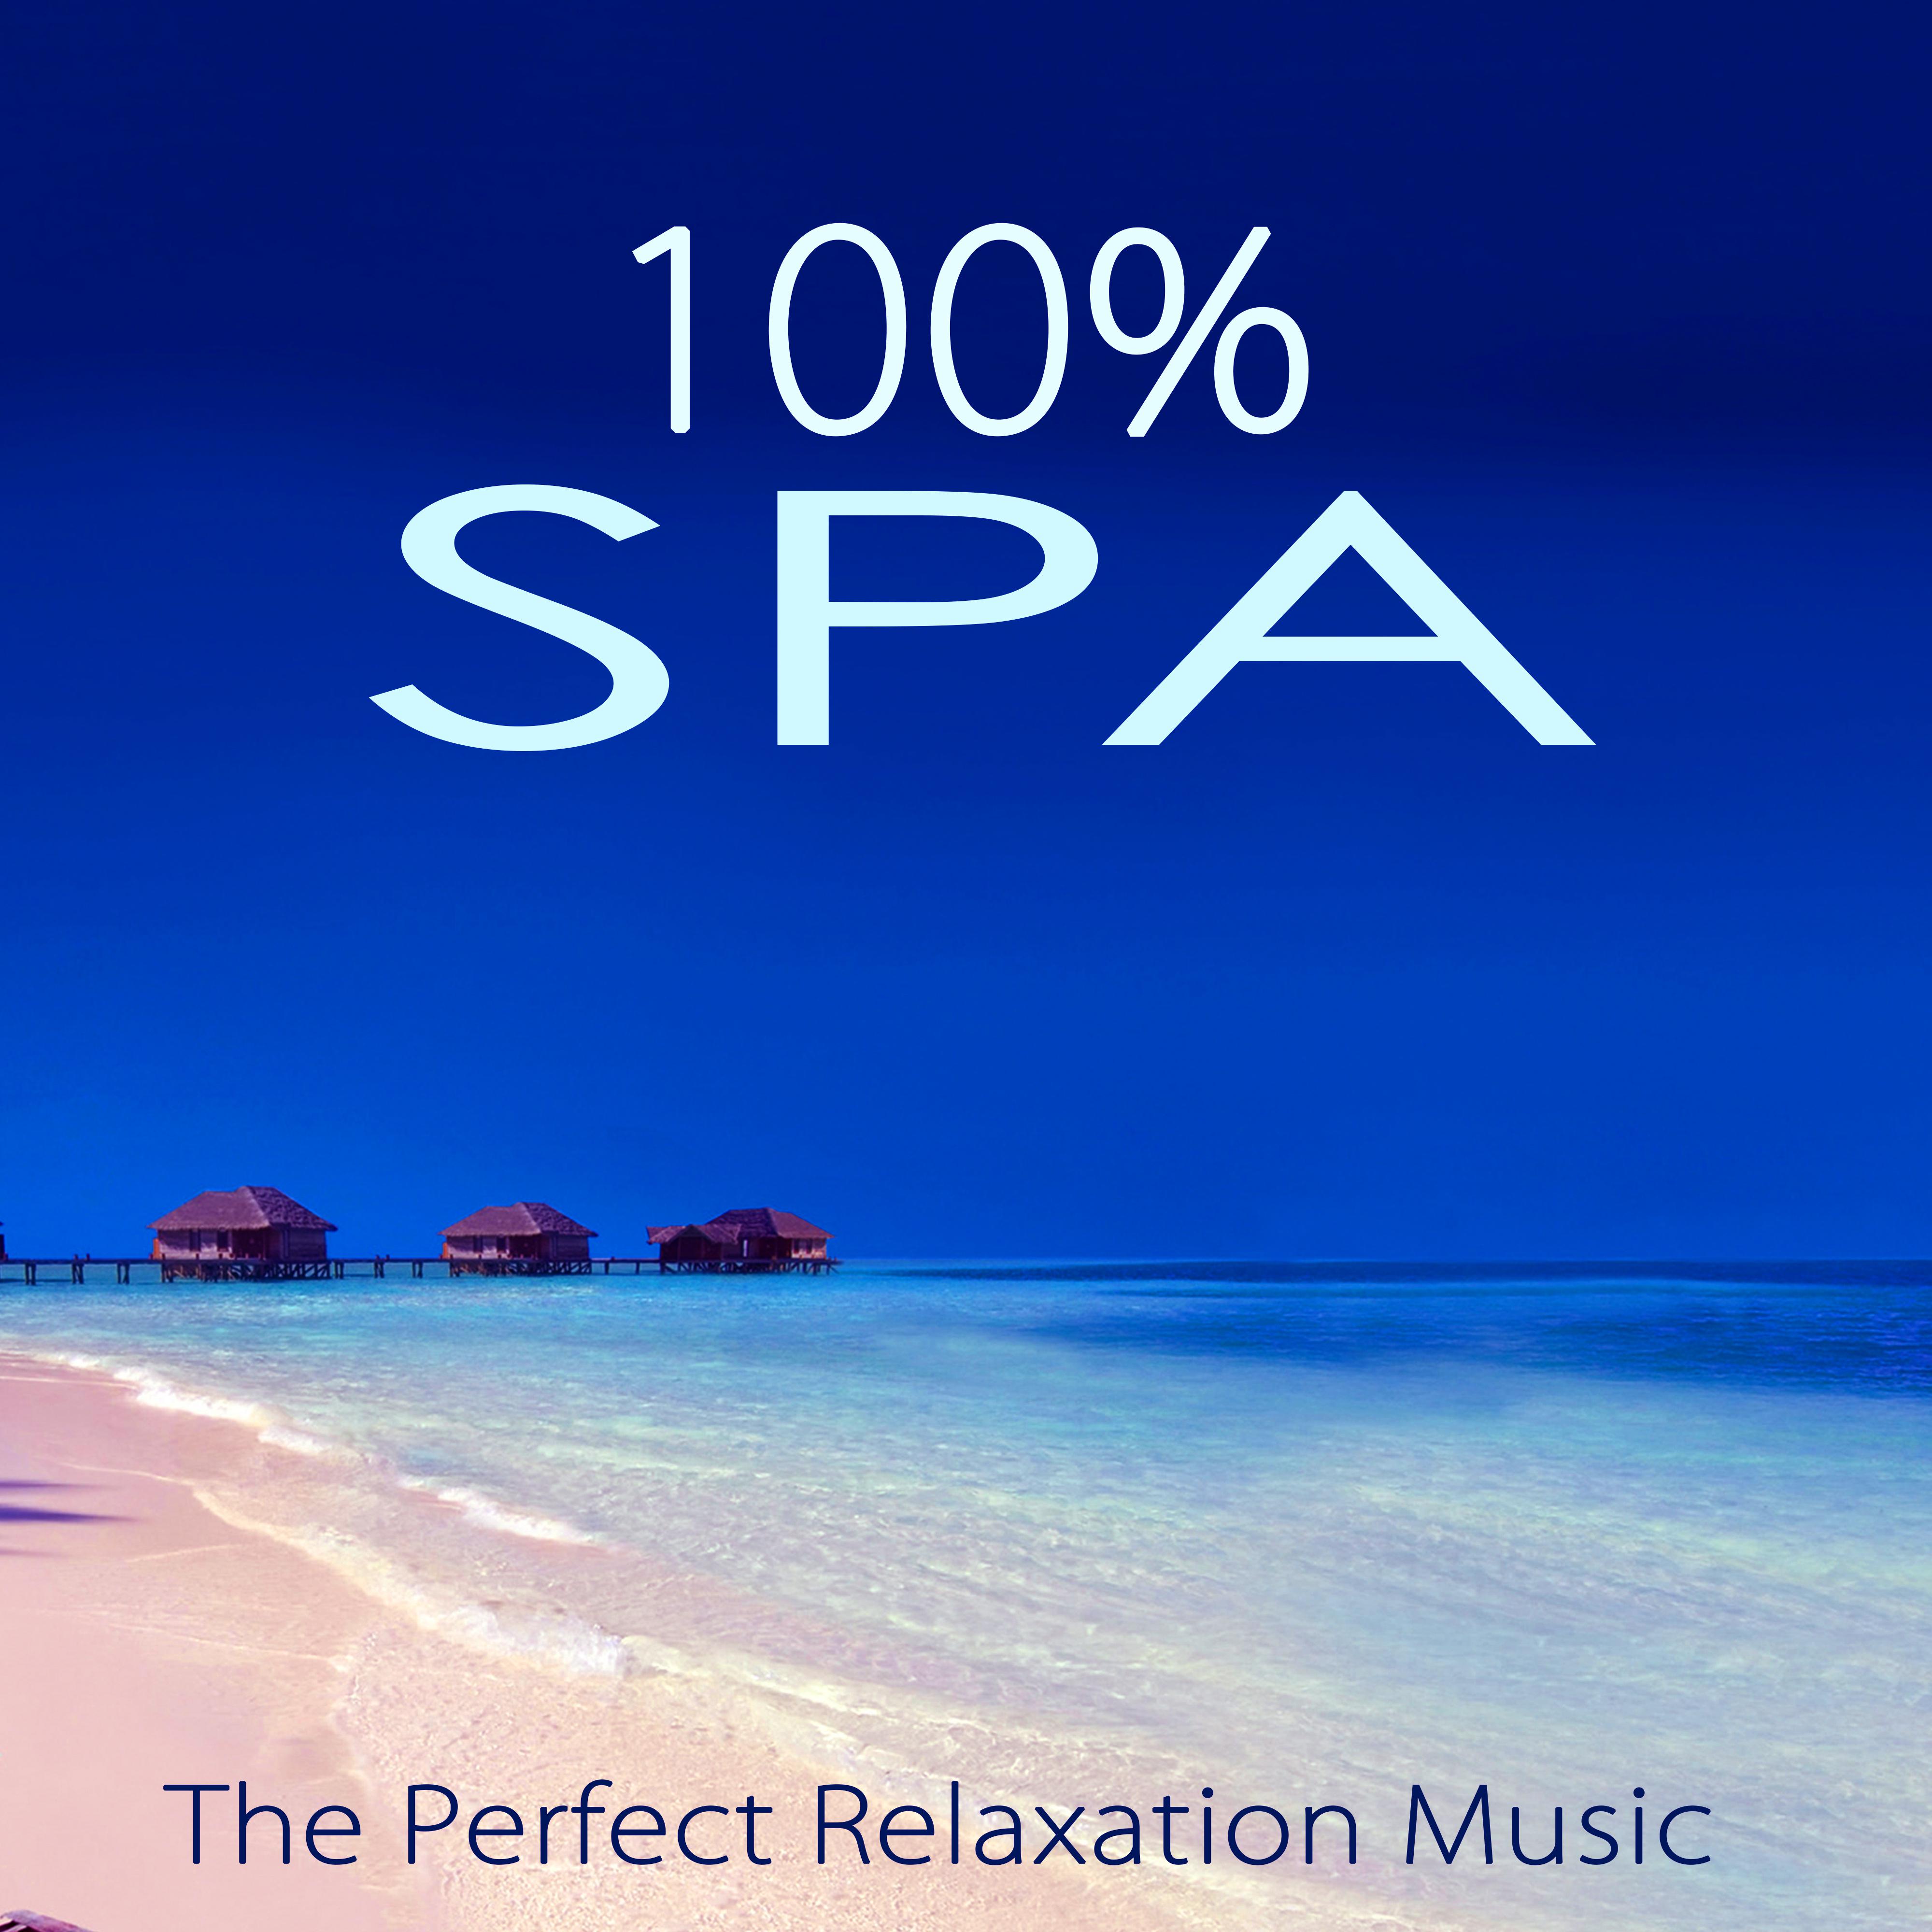 100% Spa – The Perfect Relaxation Music for Spa Treatments in Luxury Hotels & Resorts